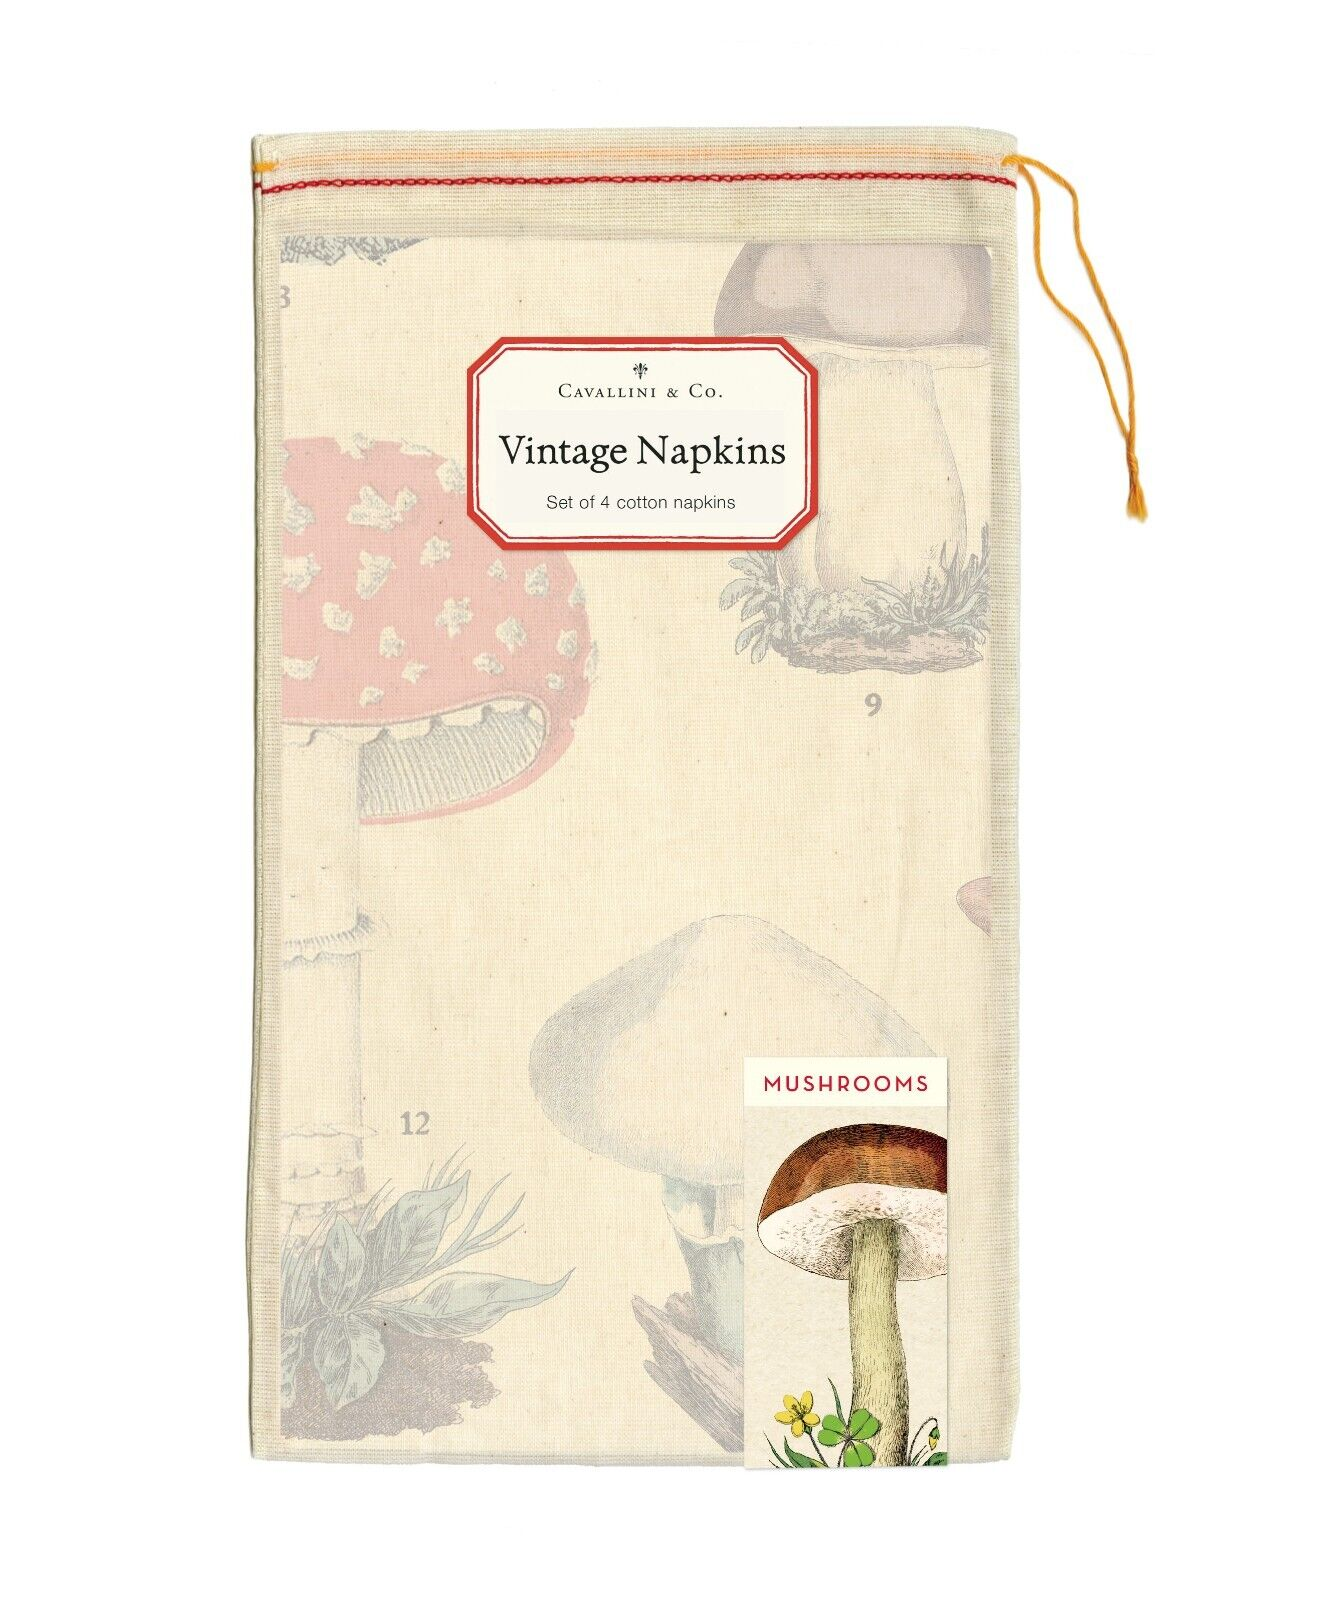 set of napkins folded into muslin bag with a sticker in the middle of the bag that reads "Vintage Napkins". A small sticker on the bottom right with tall mushroom signifying the style of napkin thats in the bag.